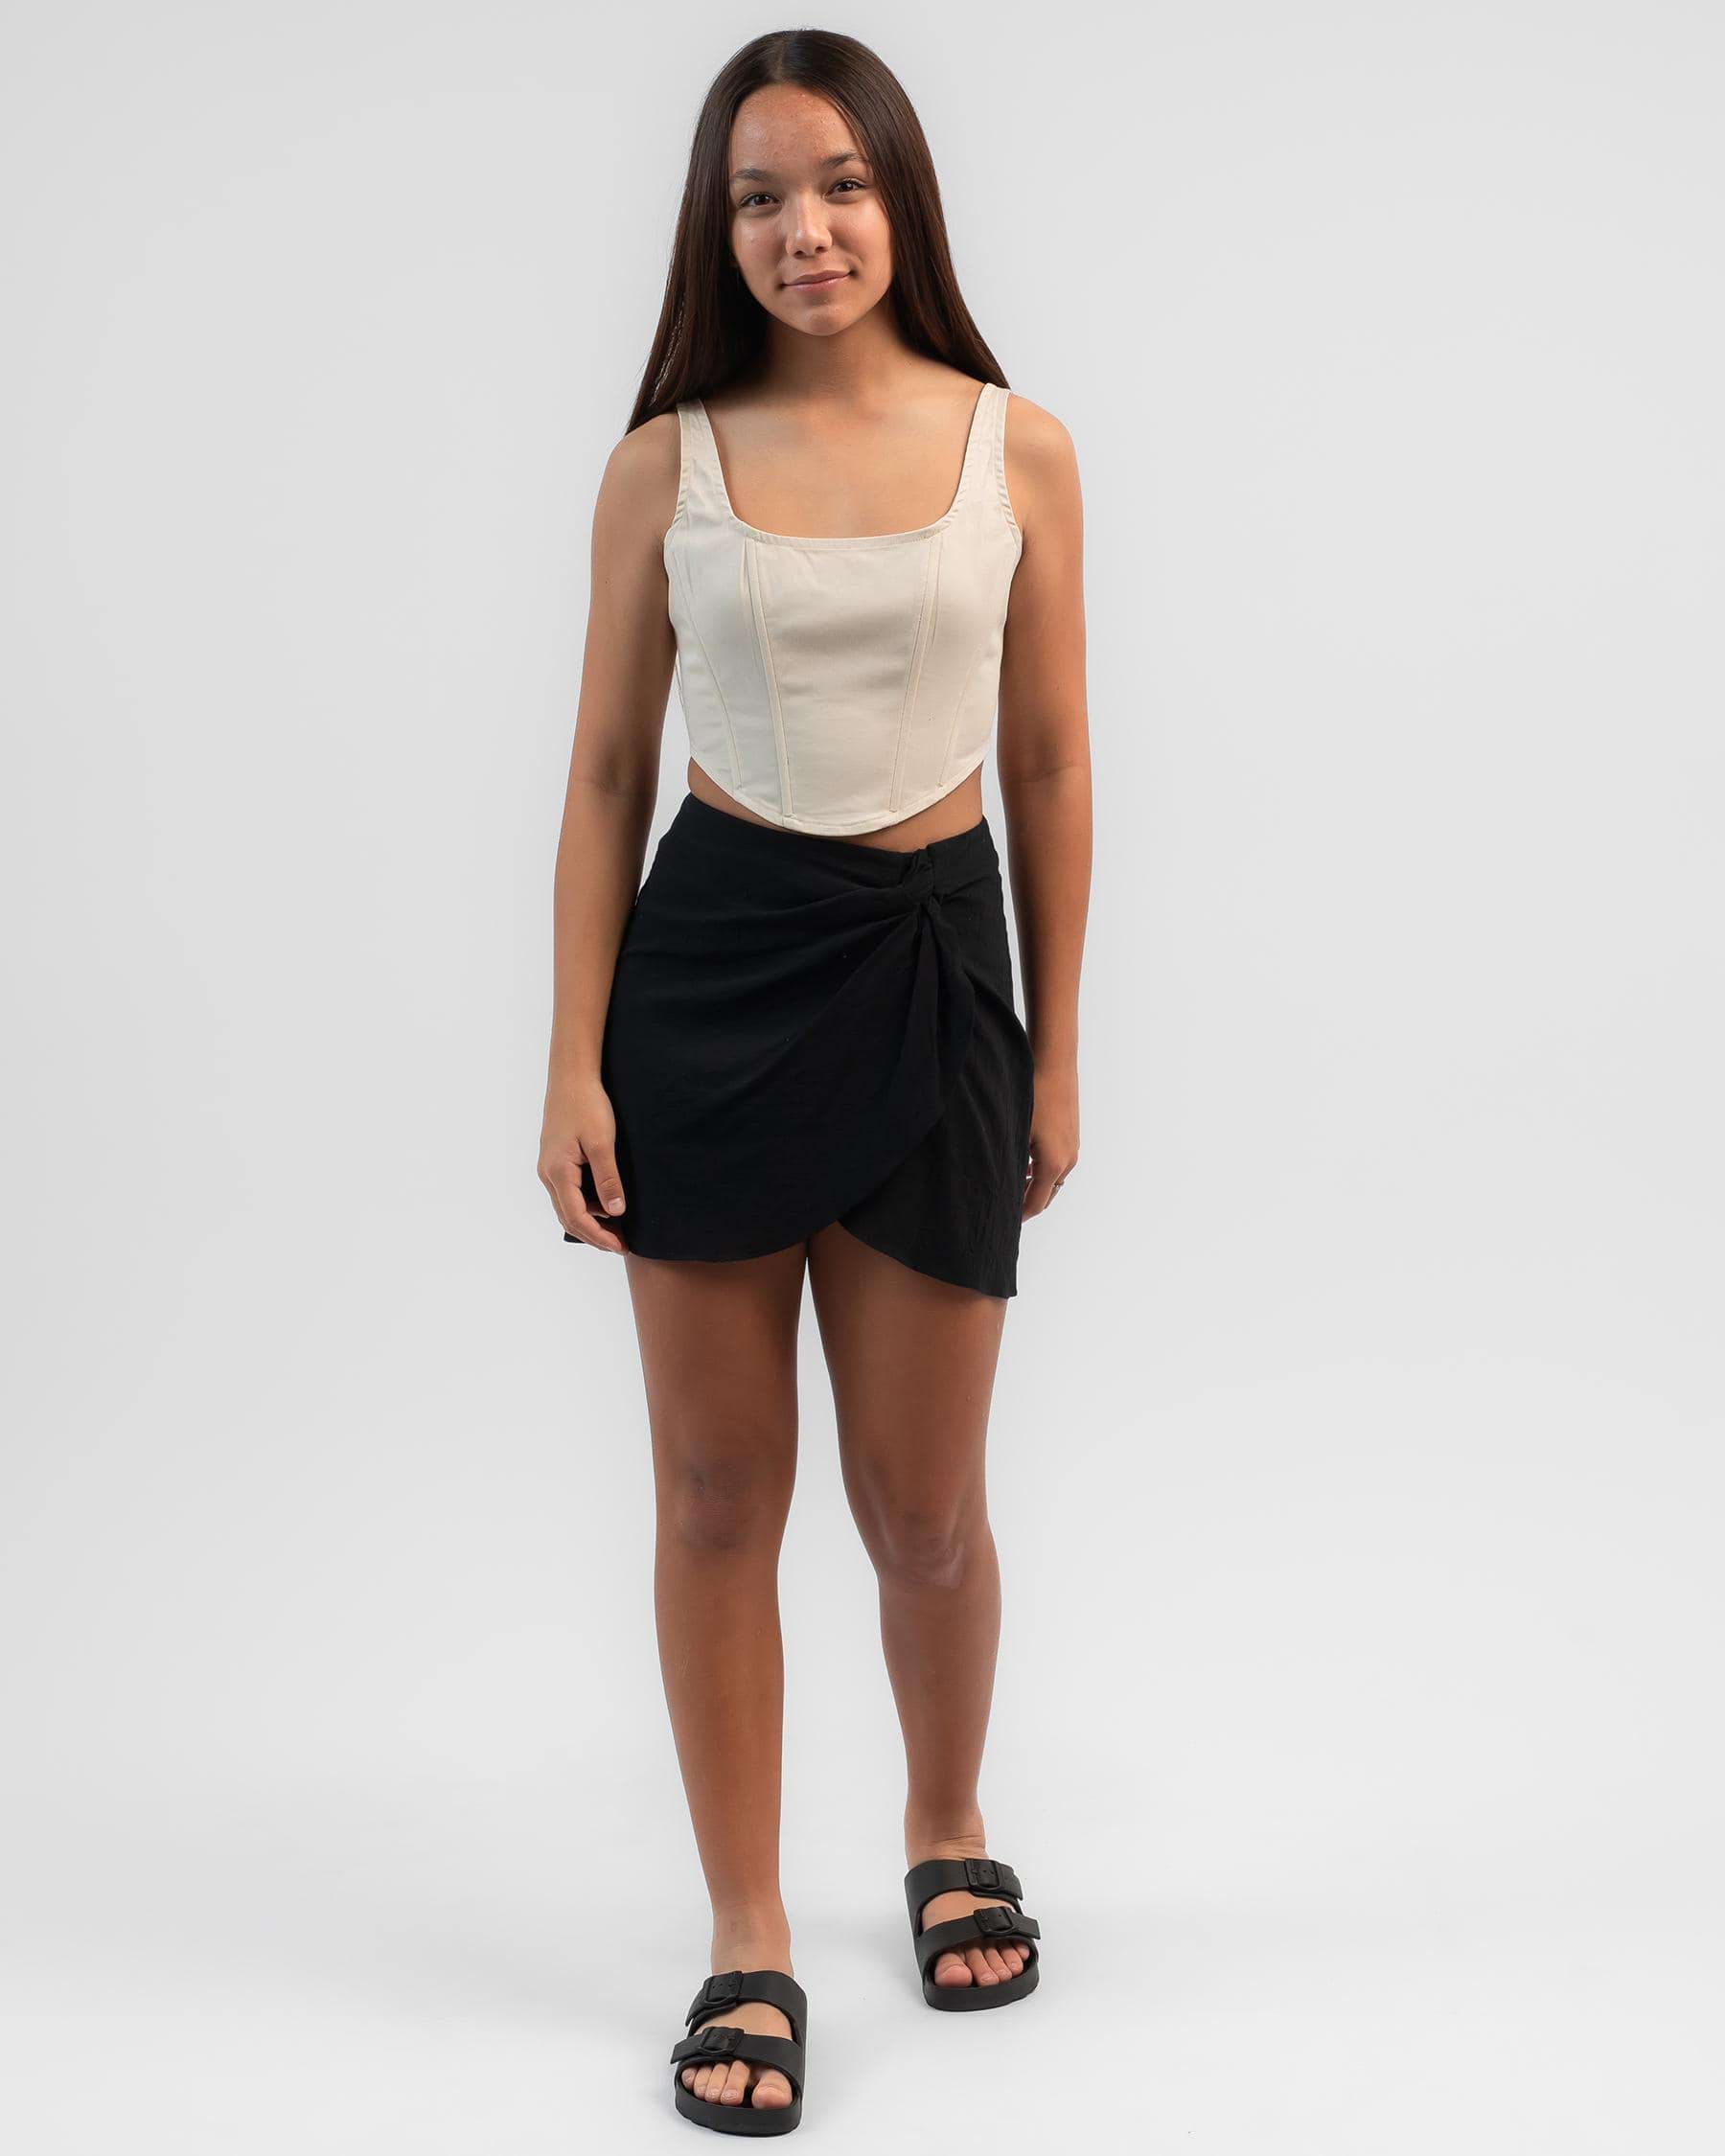 Ava And Ever Girls' Montero Corset Top In Alabaster - Fast Shipping ...